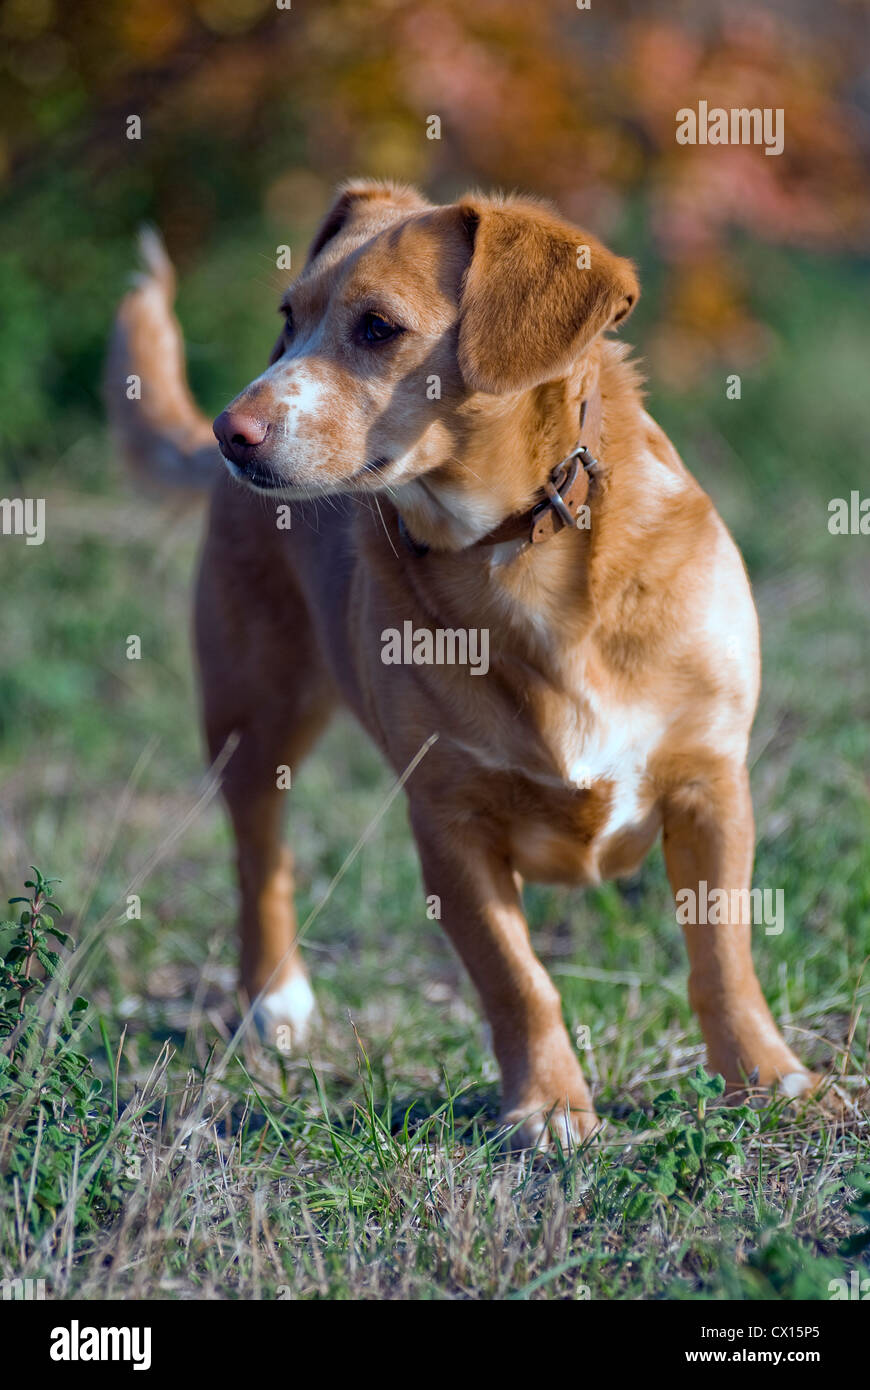 Short-haired dachshund mongrel standing on grass looking sidewards Stock Photo